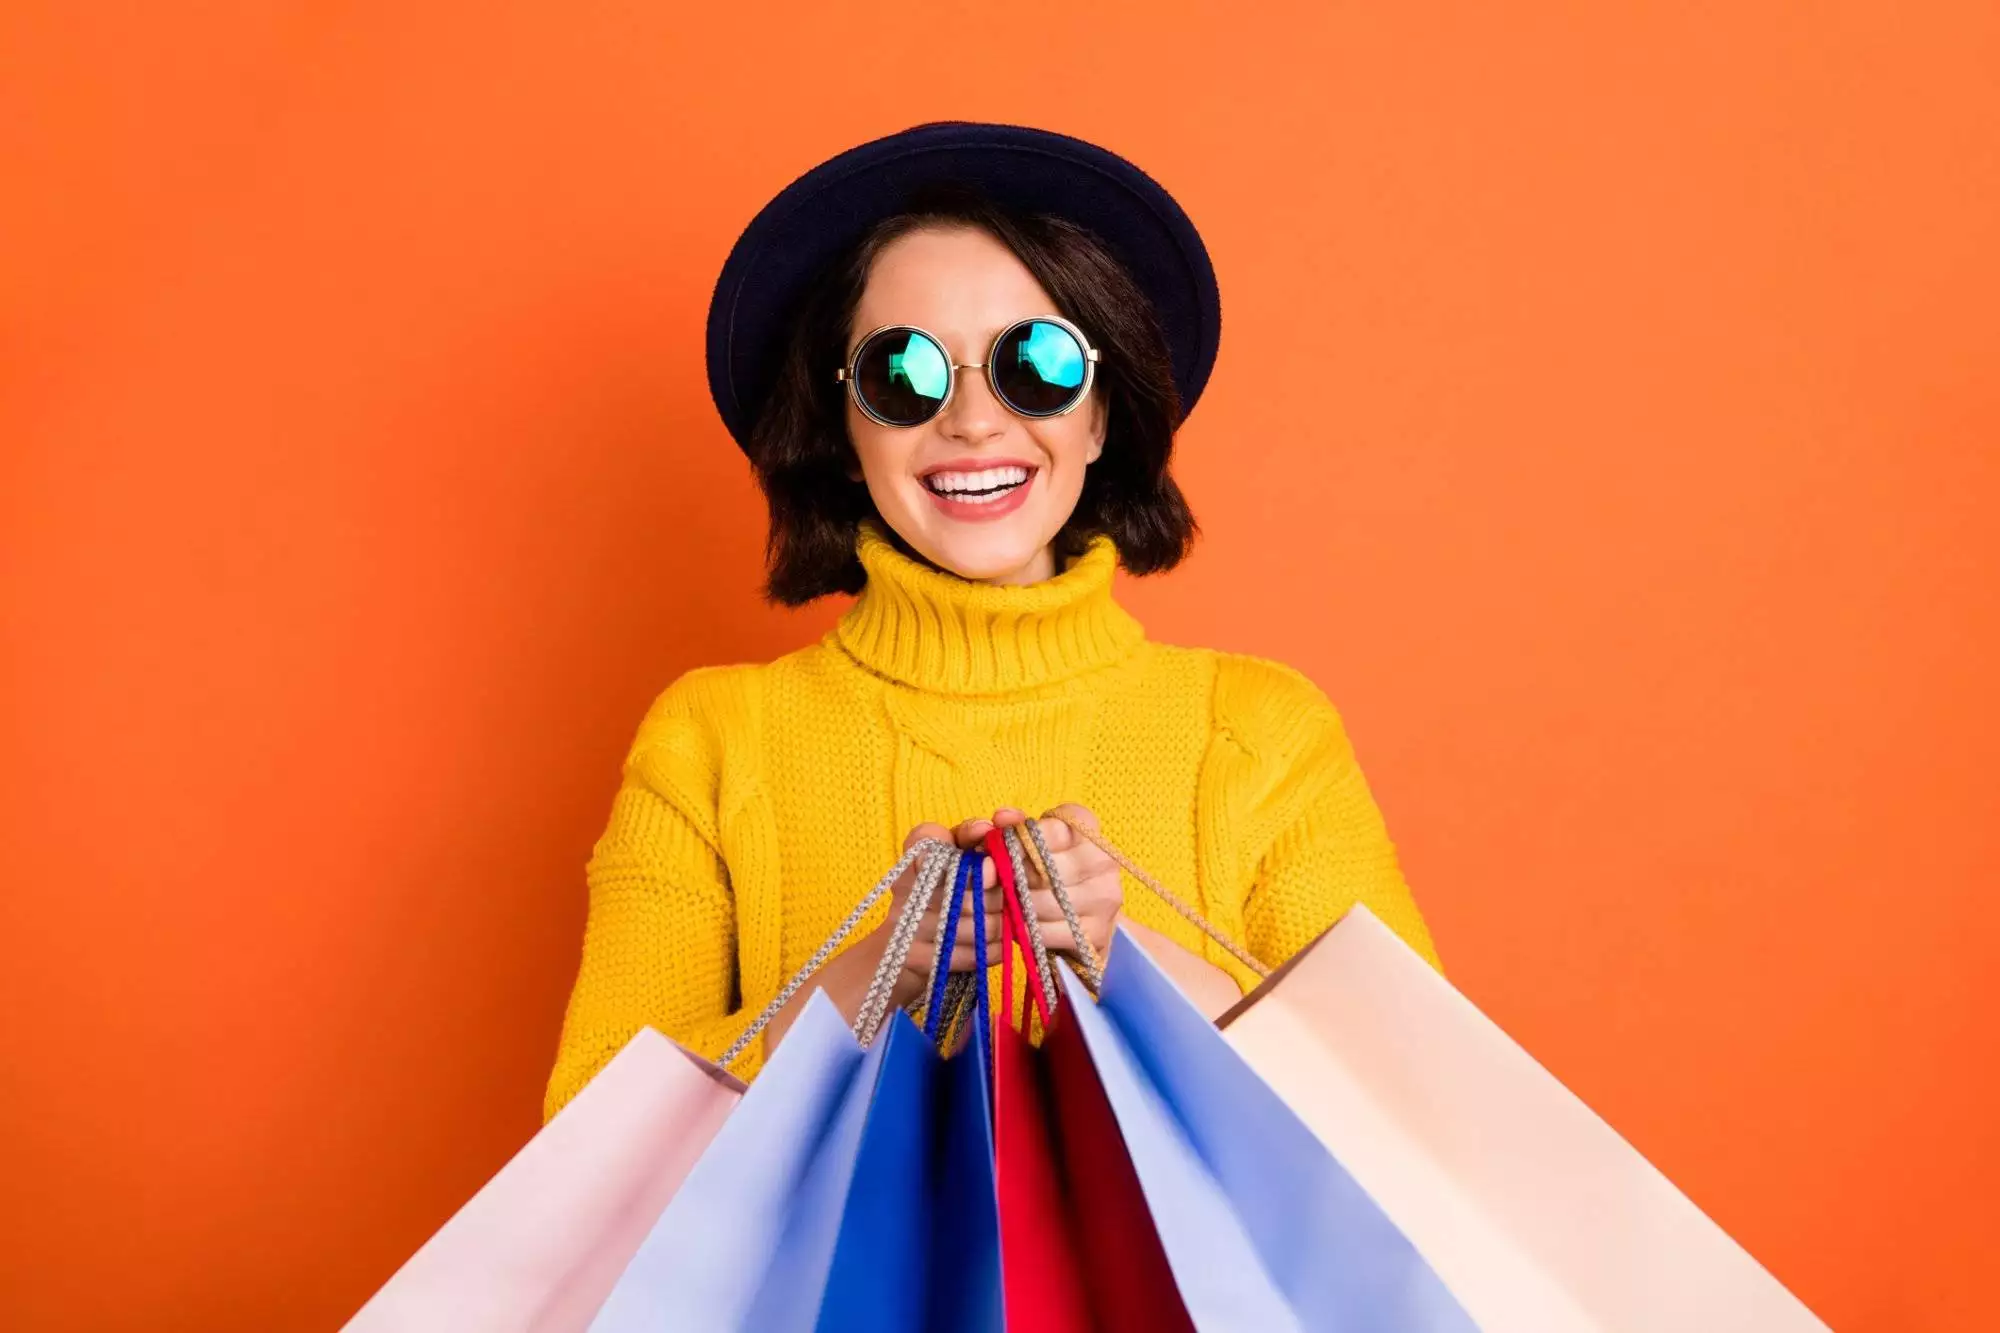 Photo of shopping cheerful girl wearing cap showing you what she has bought while isolated with orange background